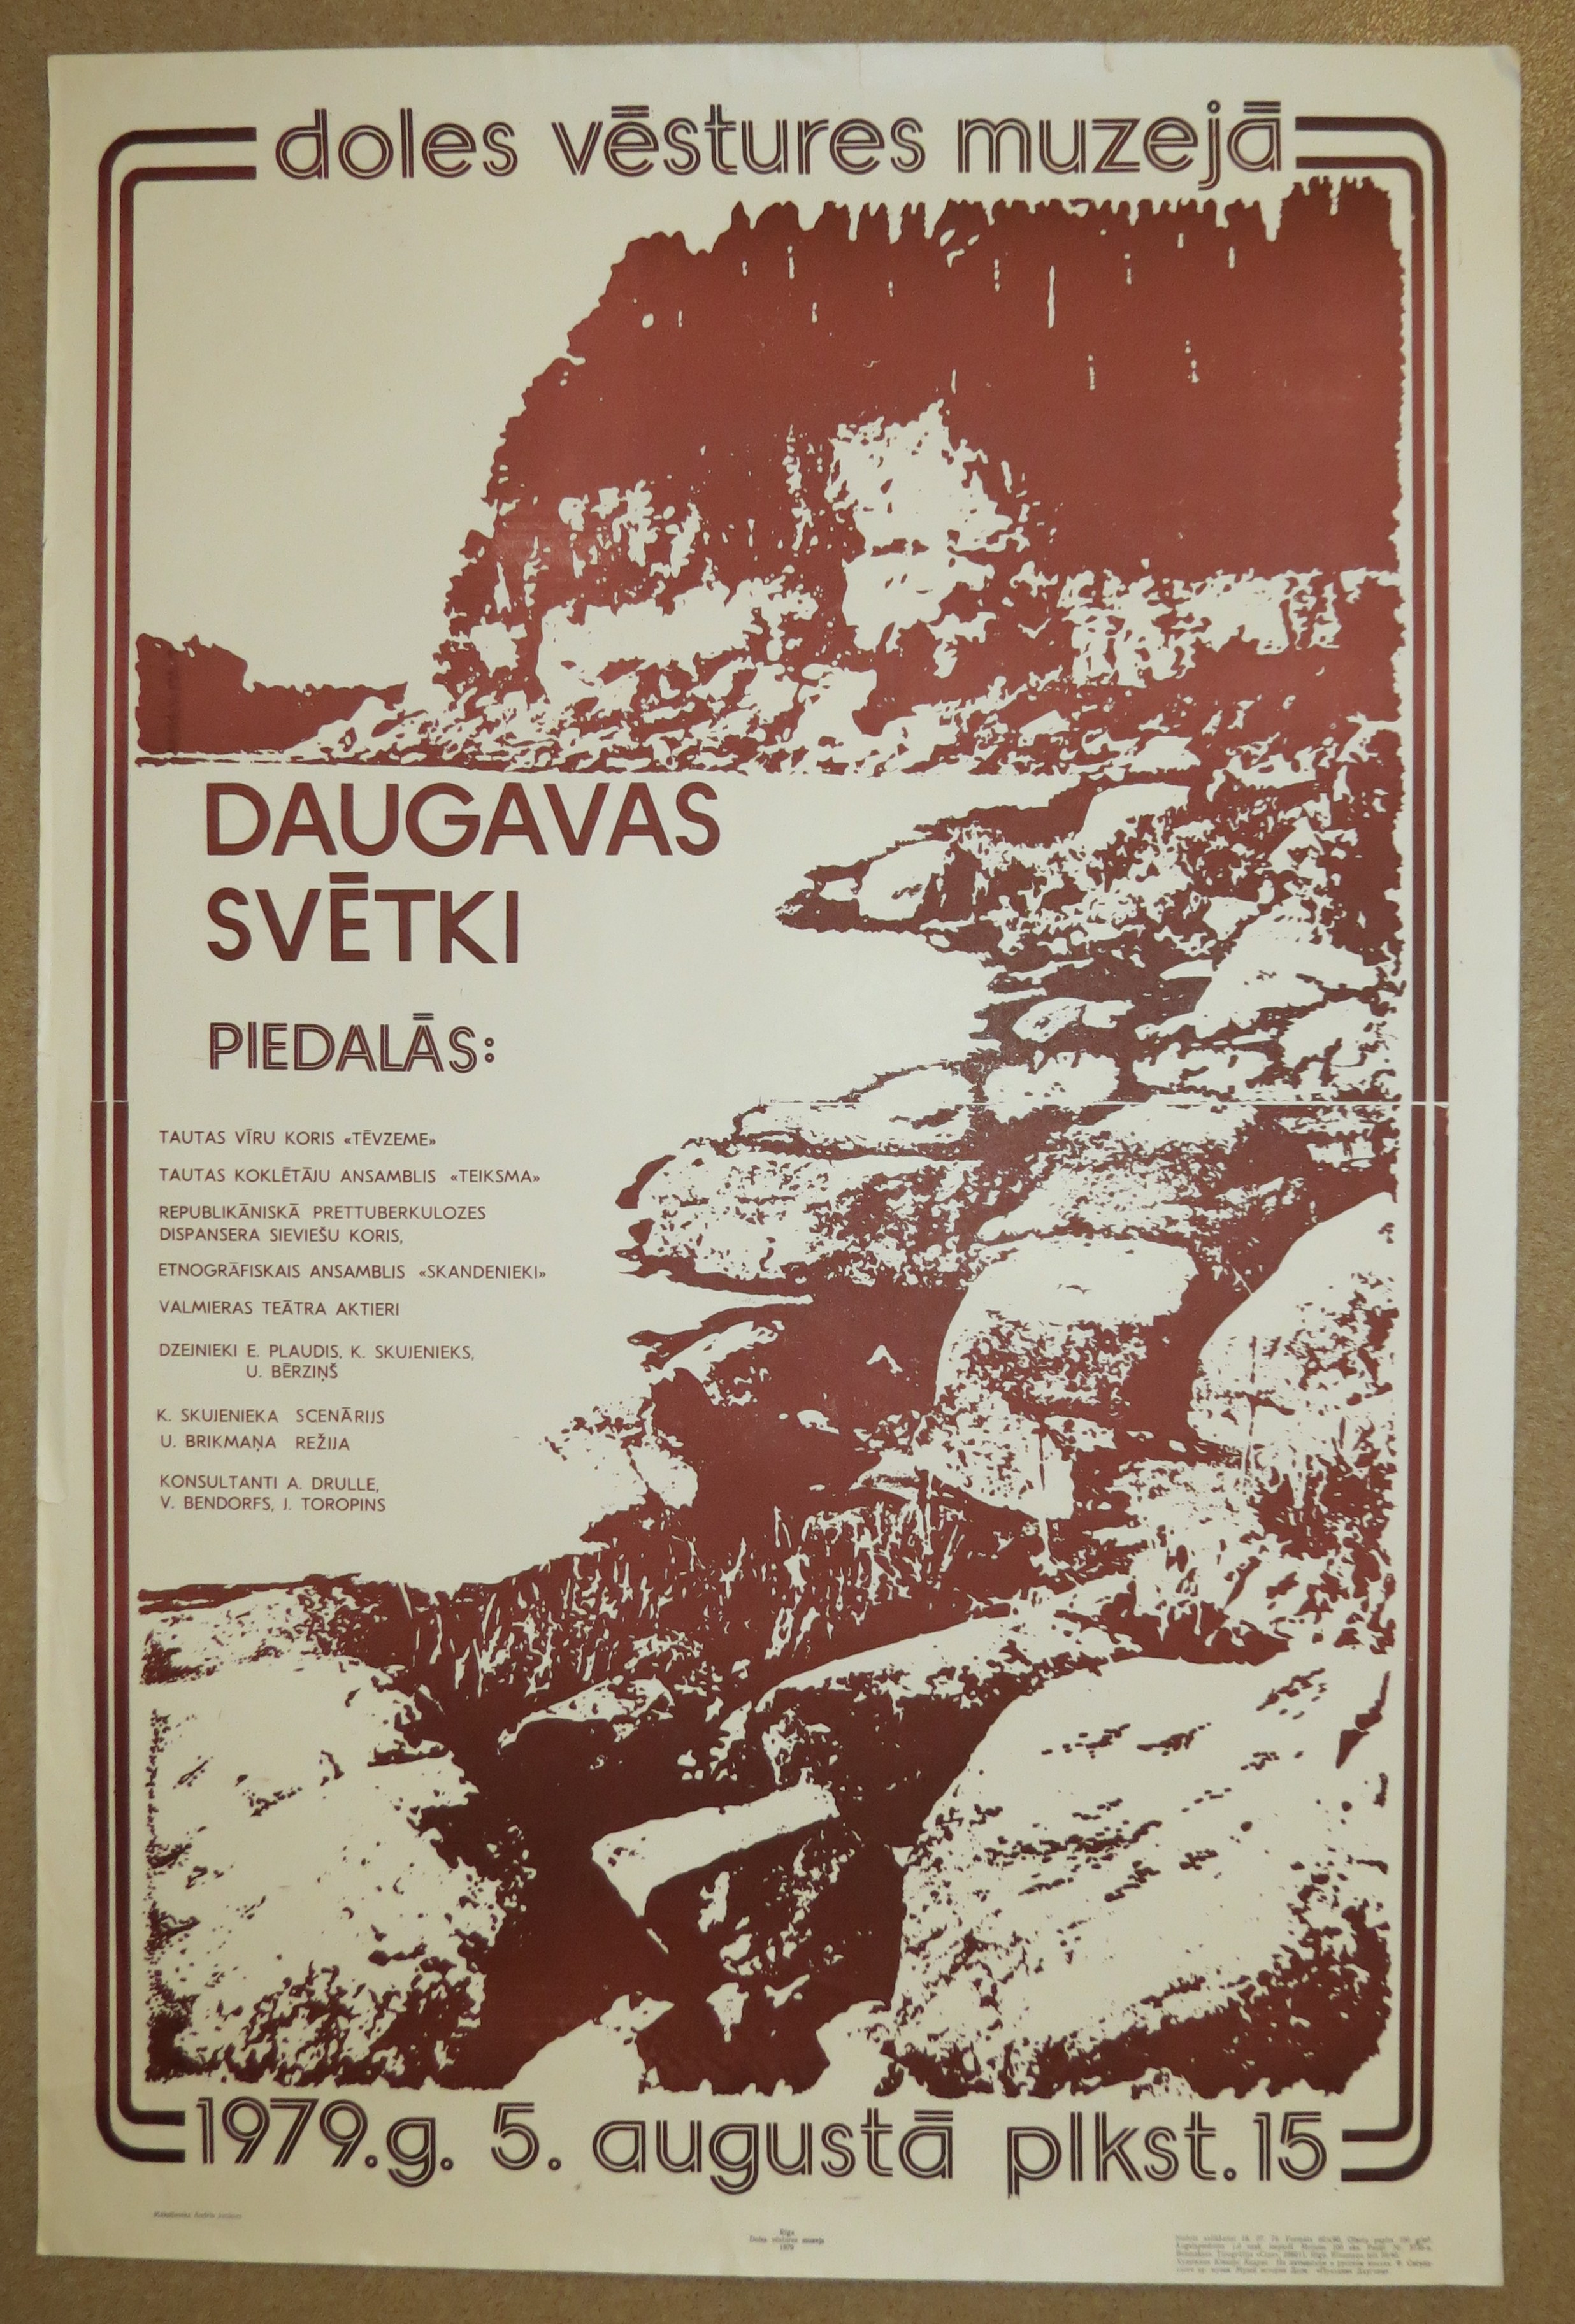 Poster of The First River Daugava Festivity in the Dole History Museum. 5 Aug 1979. Author: Andris Junkers